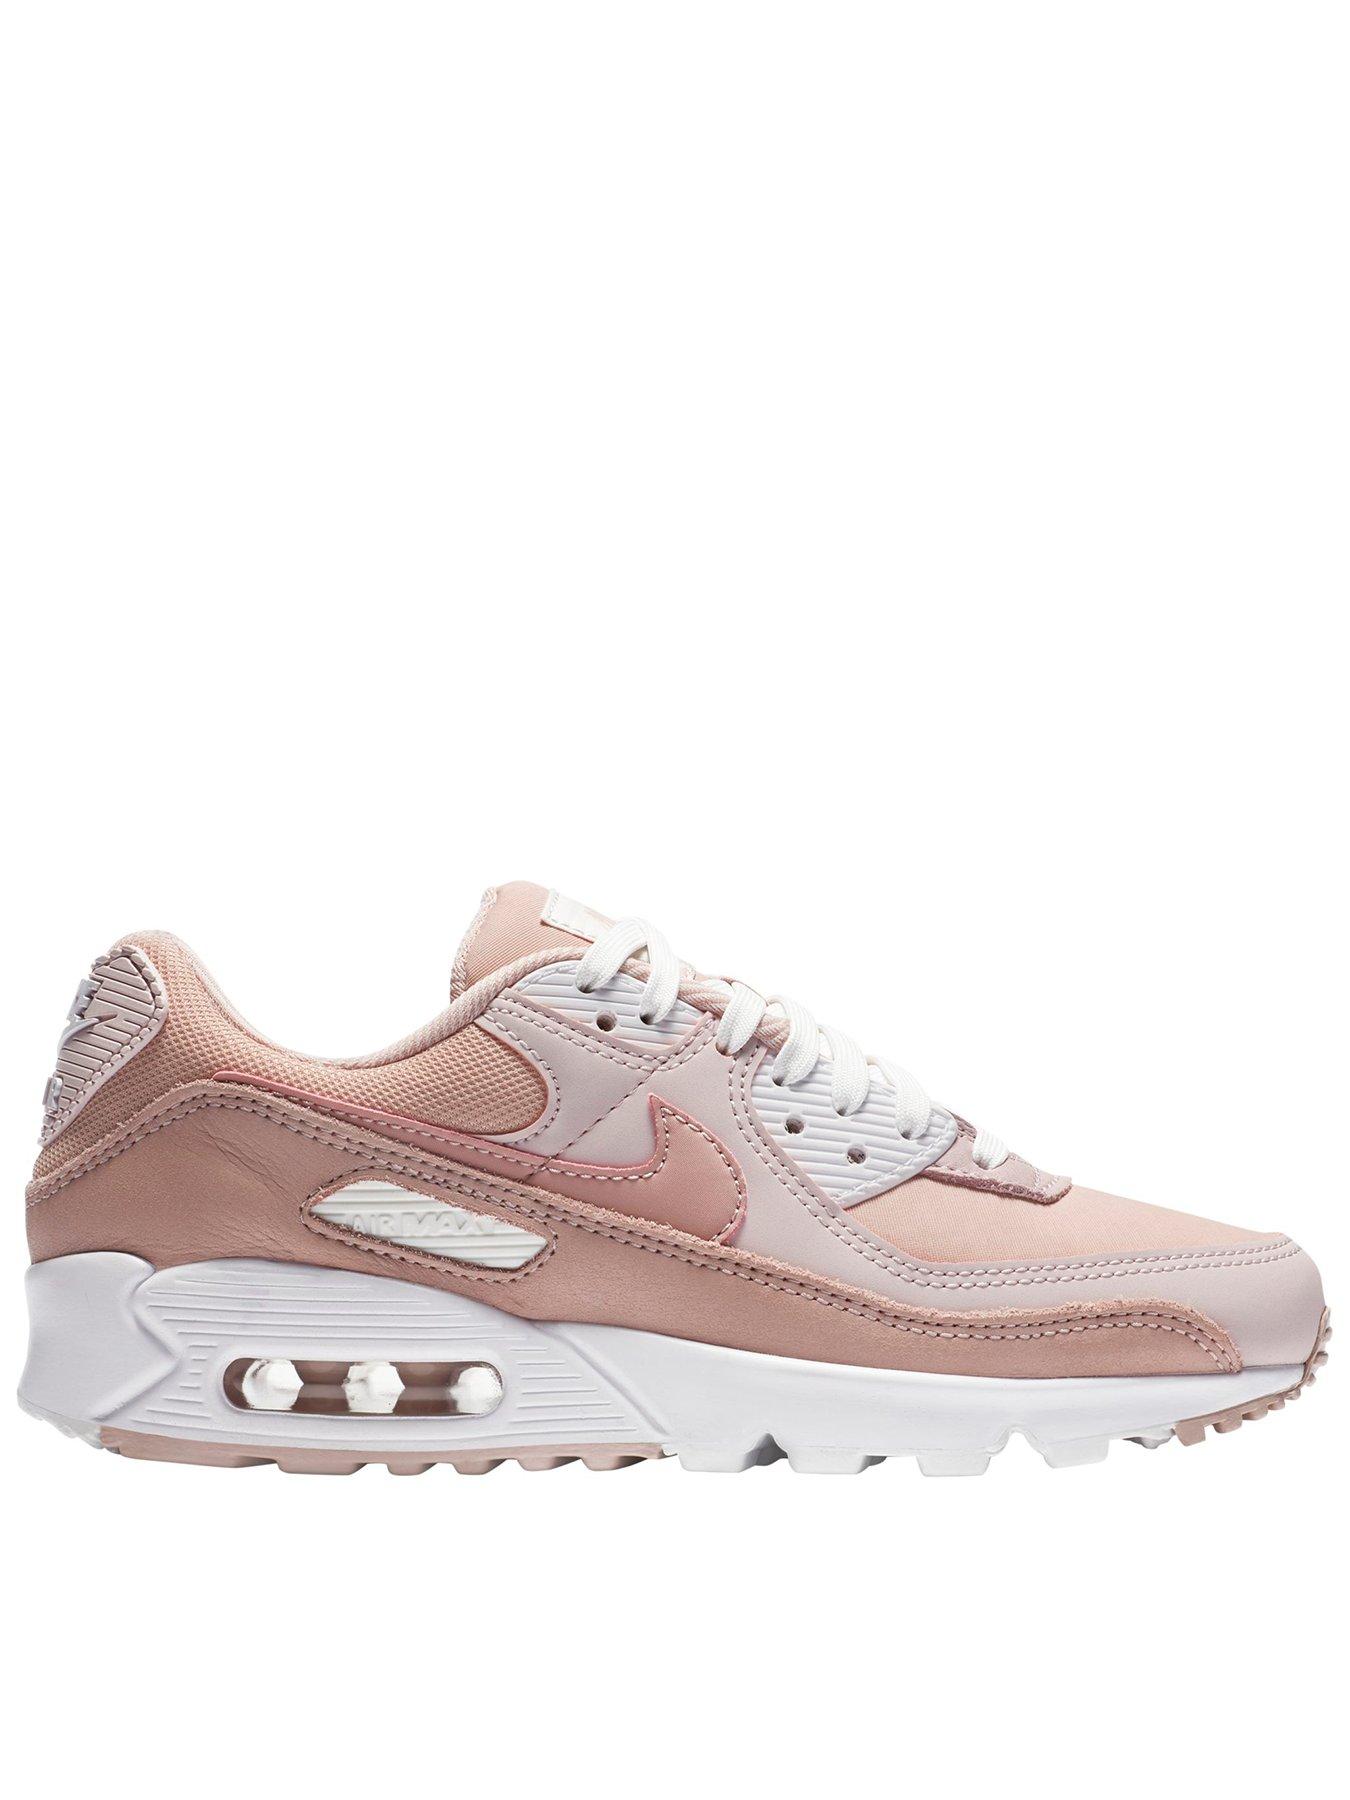 Nike Air Max 90 Trainer - Pink/White | littlewoods.com